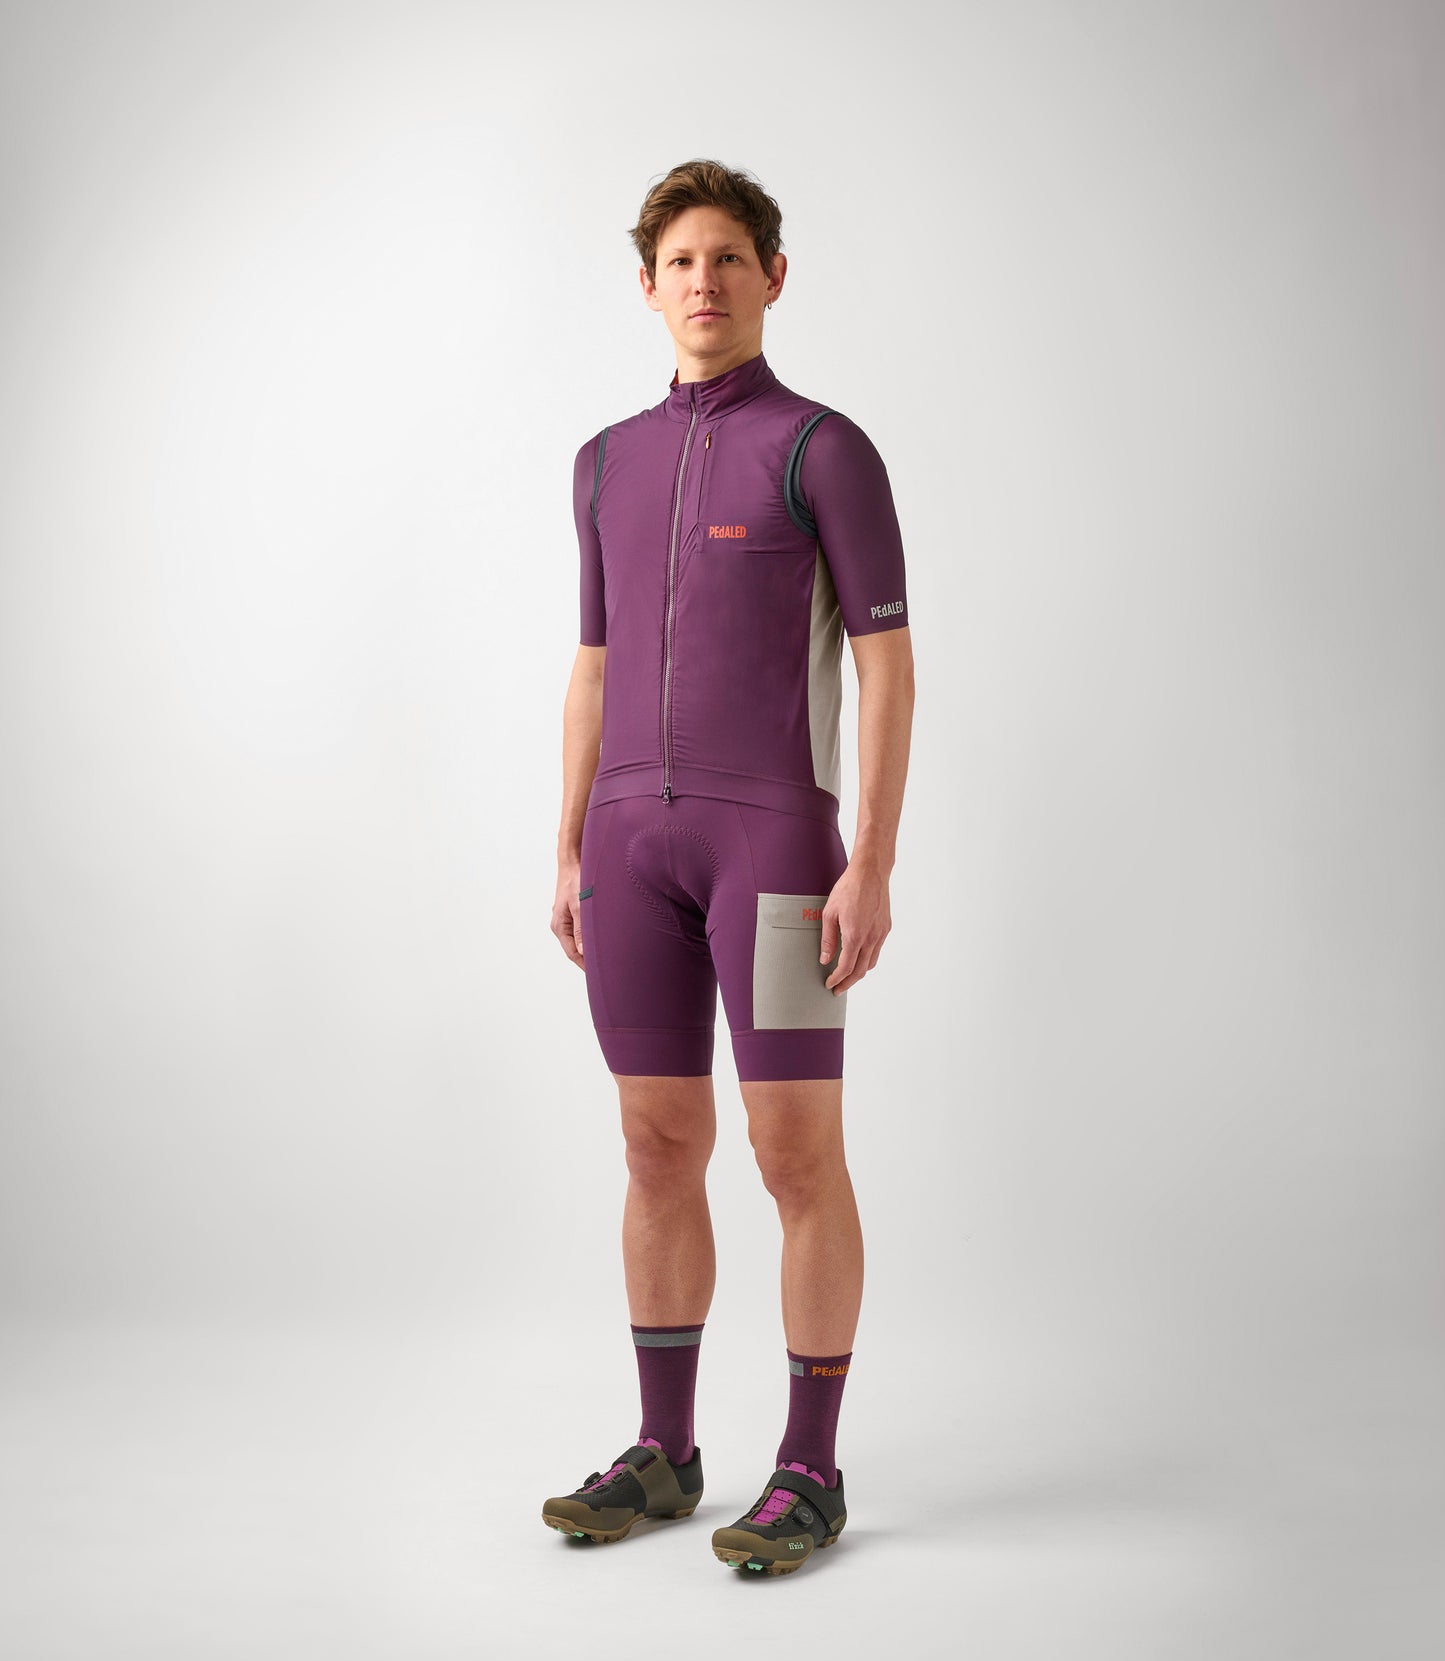 23SAVOD10PE_3_men cycling alpha vest purple odyssey total body front pedaled